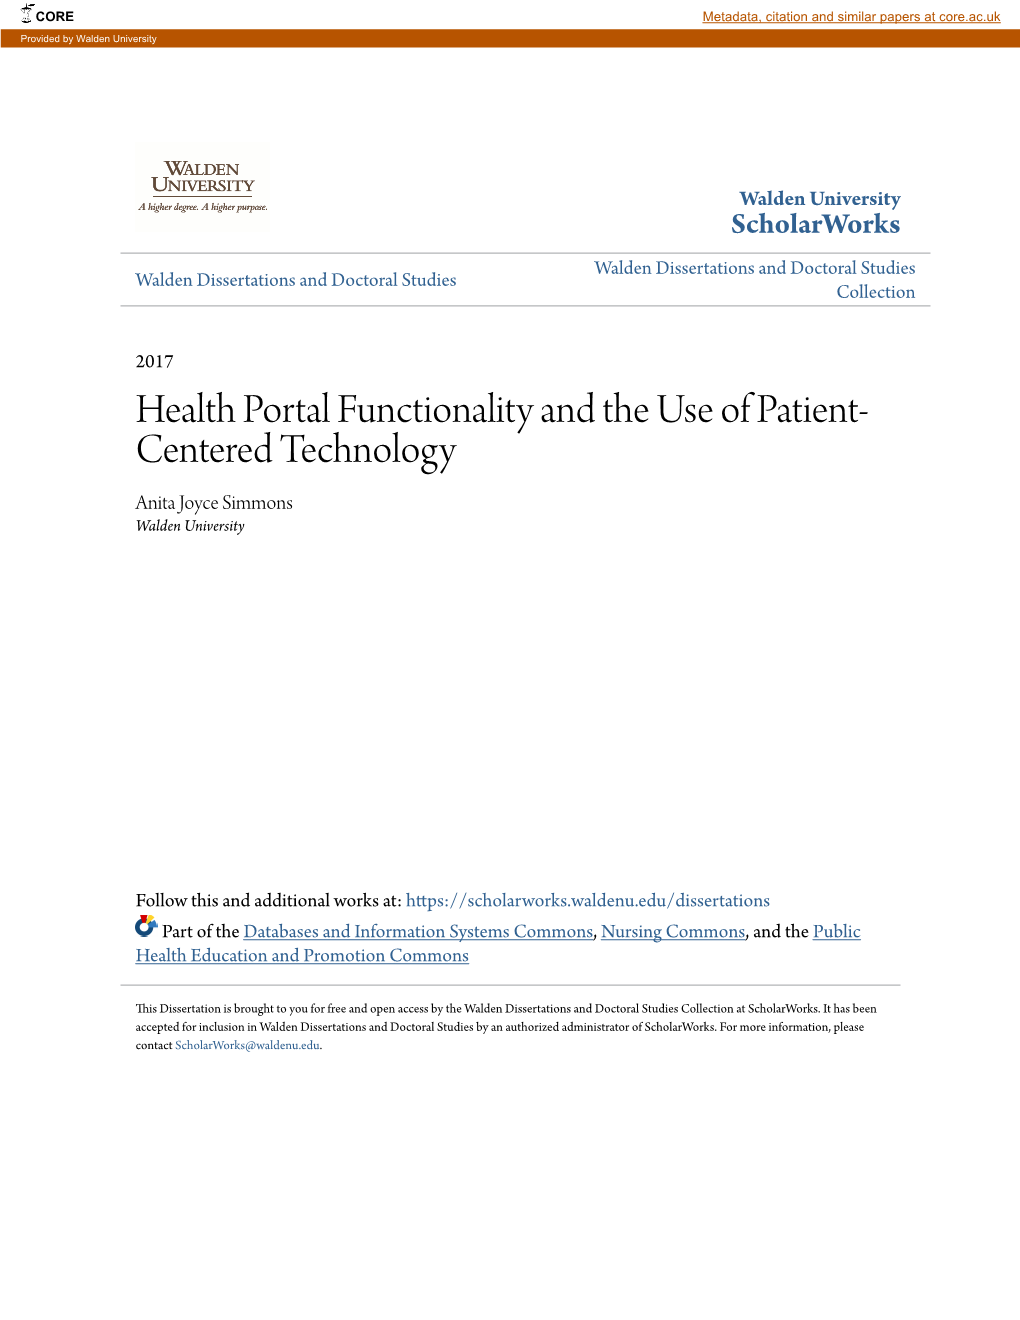 Health Portal Functionality and the Use of Patient-Centered Technology